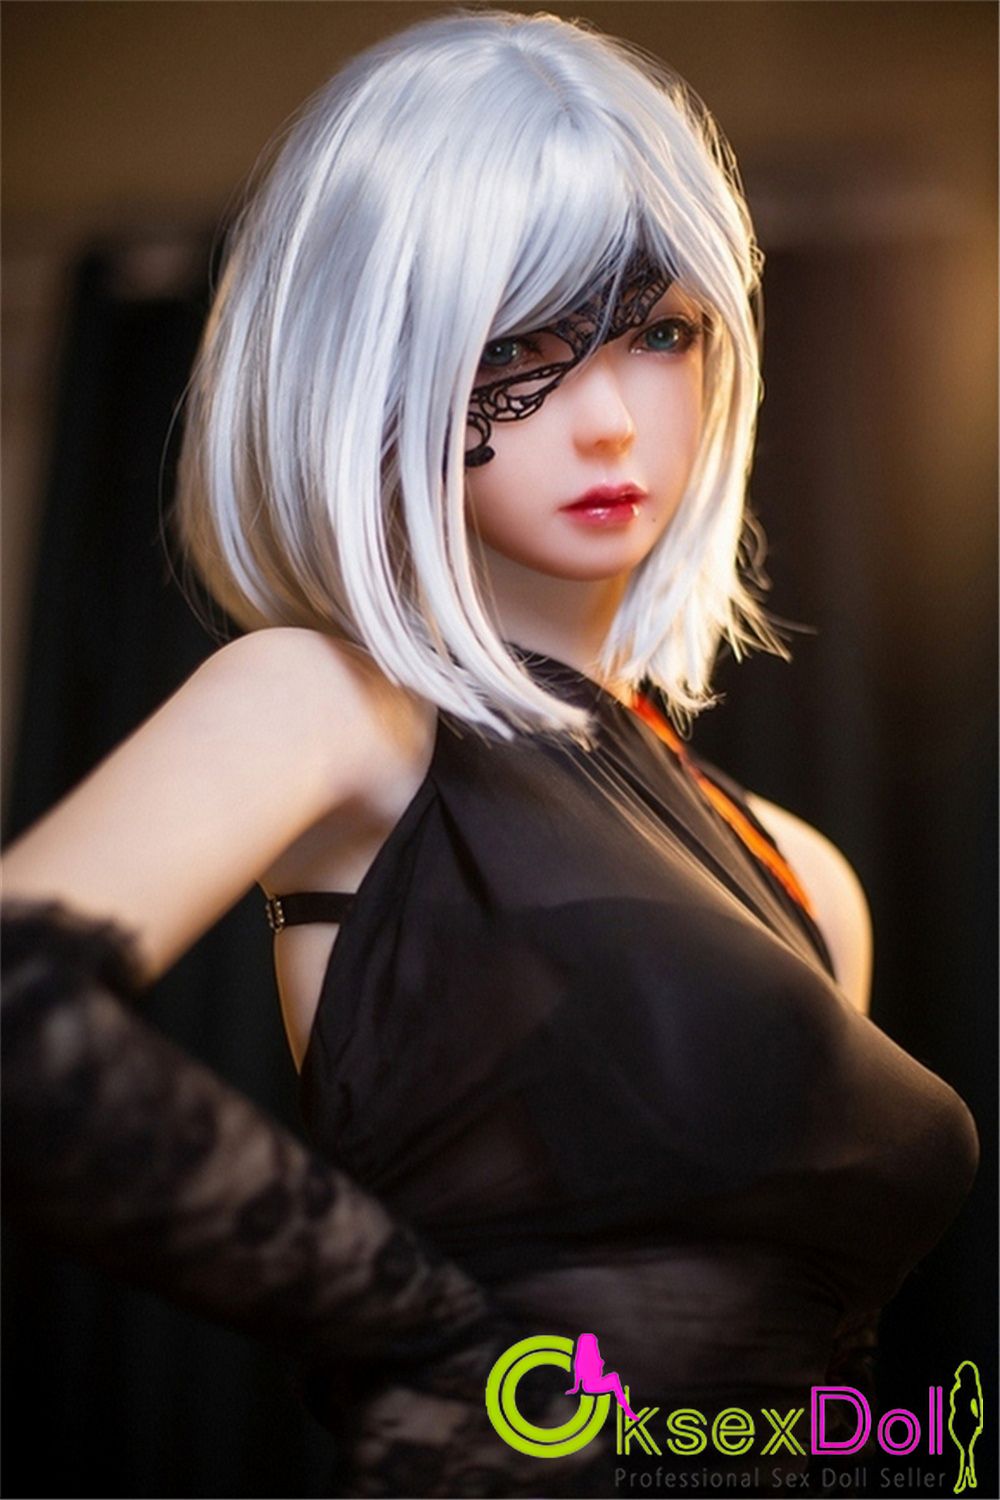 E-cup White Haired Sex Doll Image